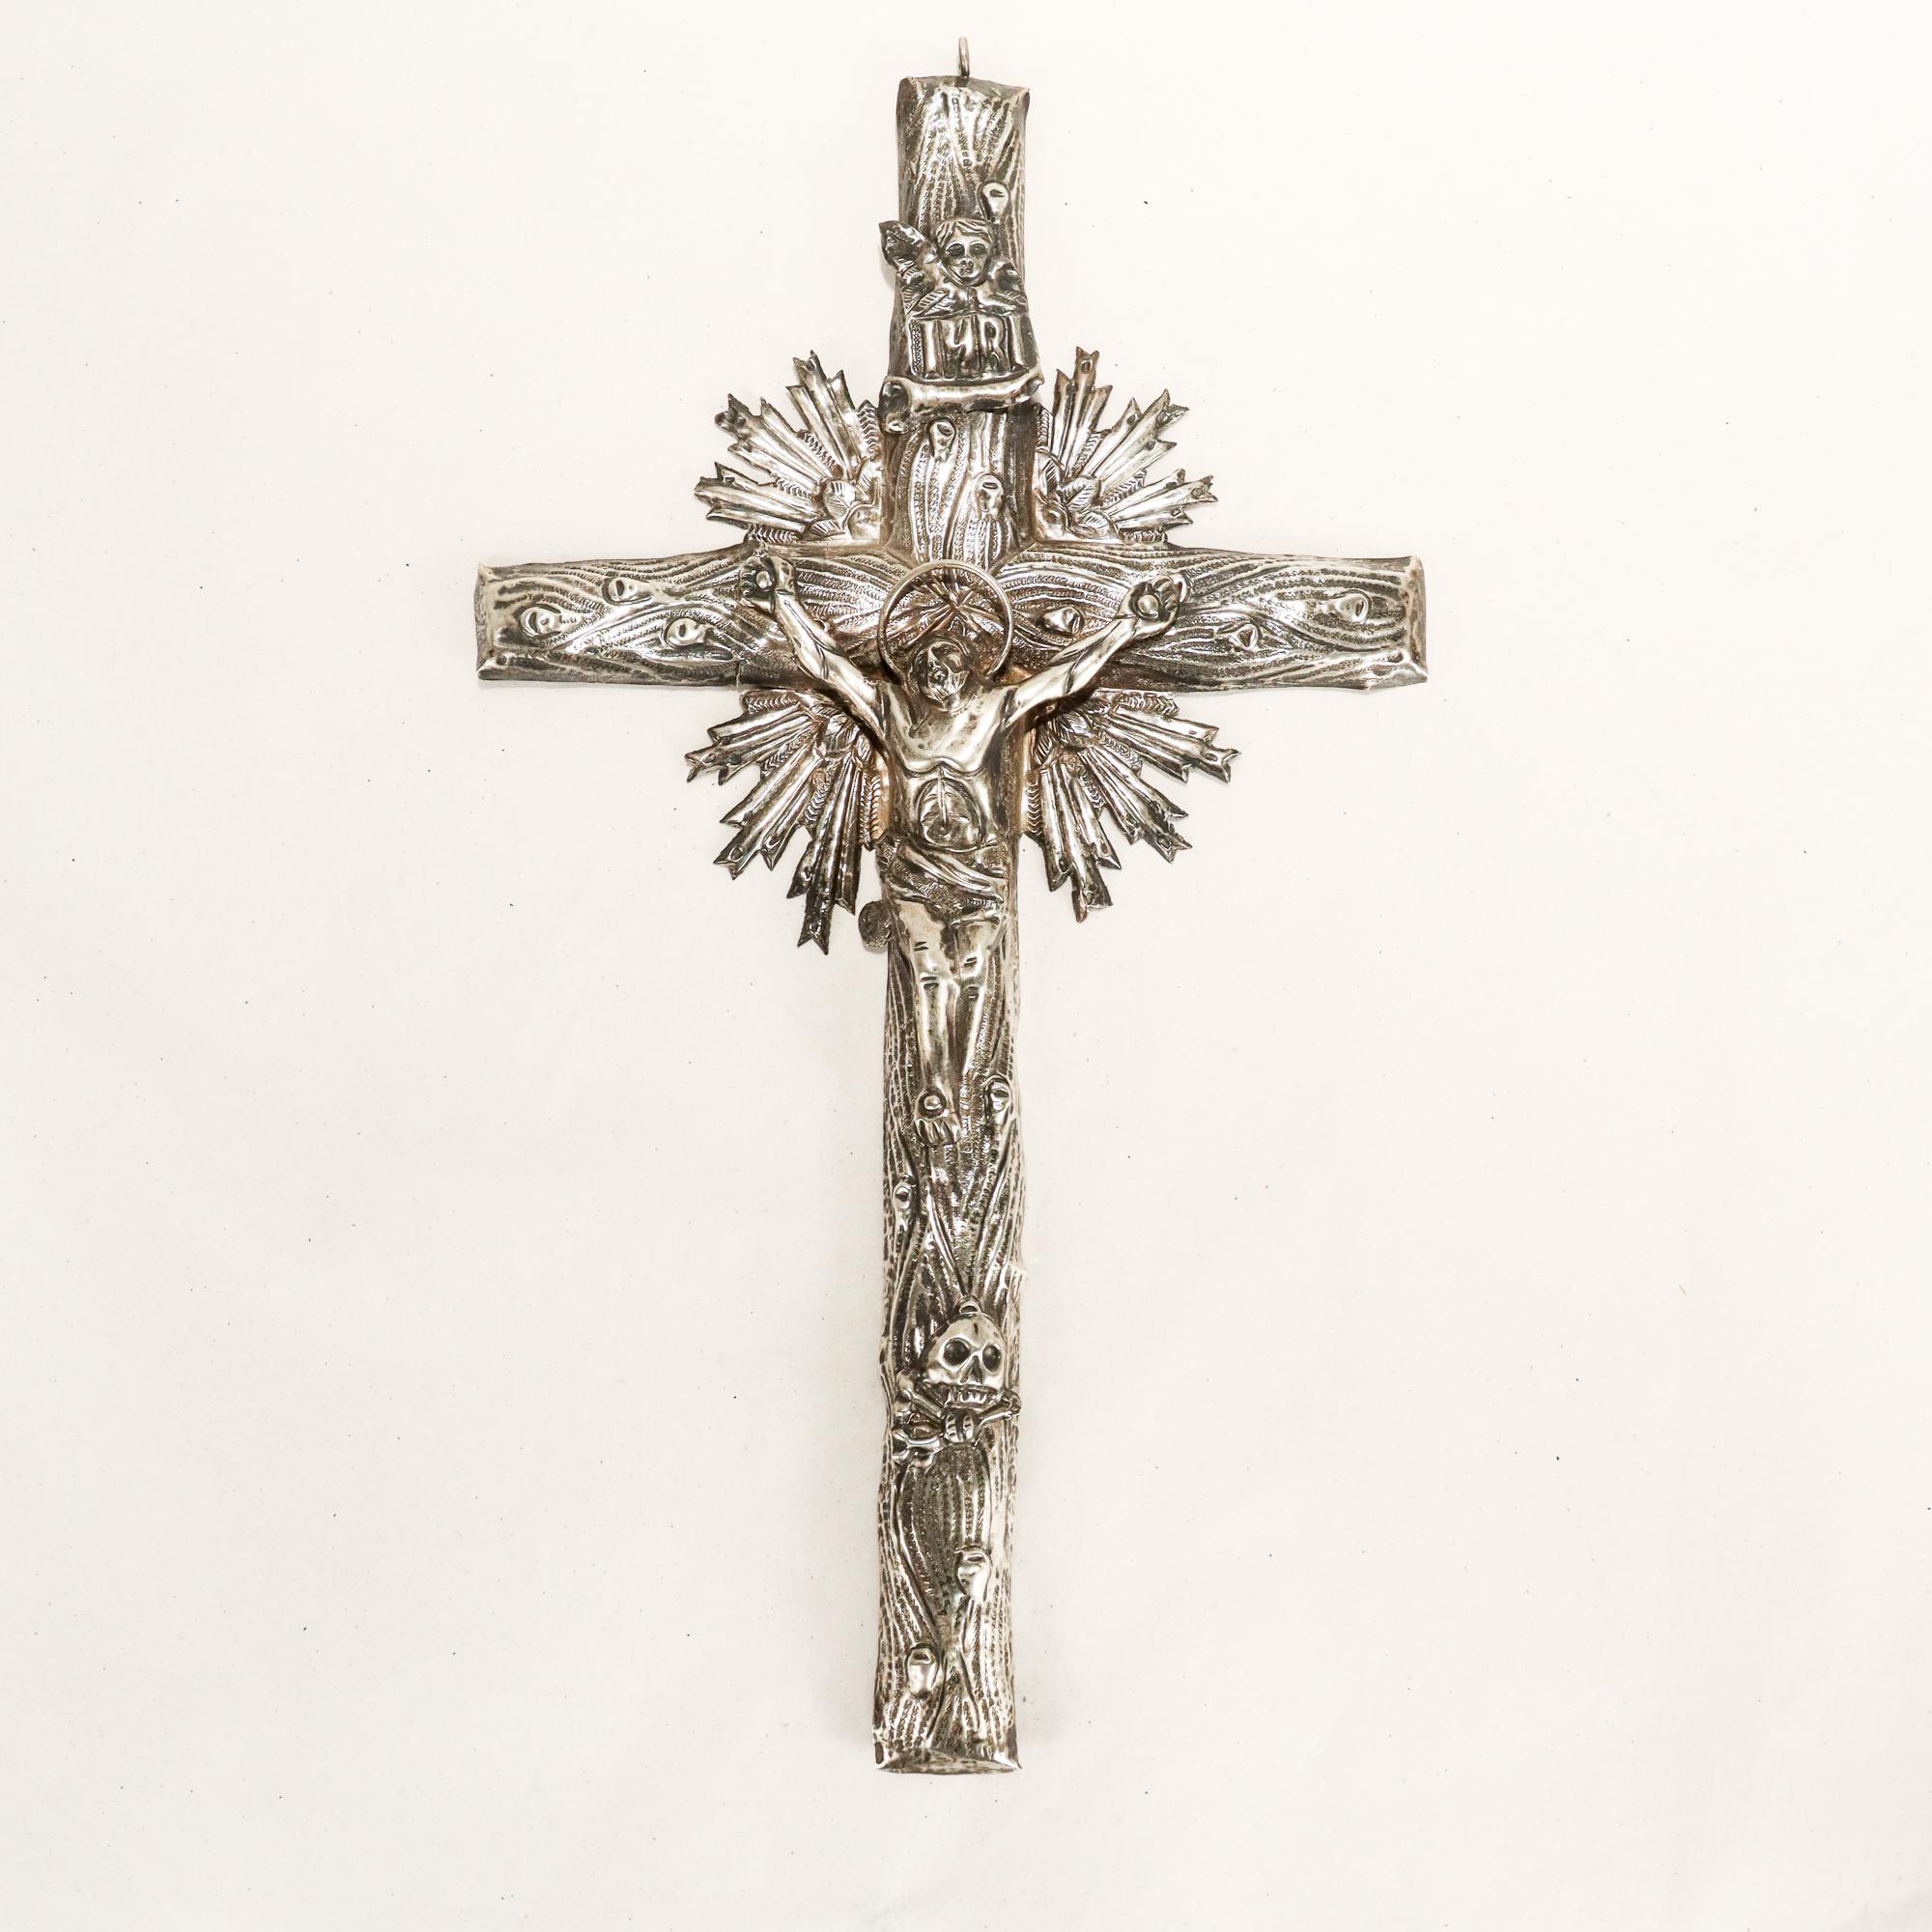 A fine antique Eastern orthodox silver crucifix.

In (what we believe to be) .800 polish silver.

The crucifix with a wood grain in front of a stylized star and mounted with an INRI plaque, a Christ figure, and a skull & crossbones.

Mounted to the